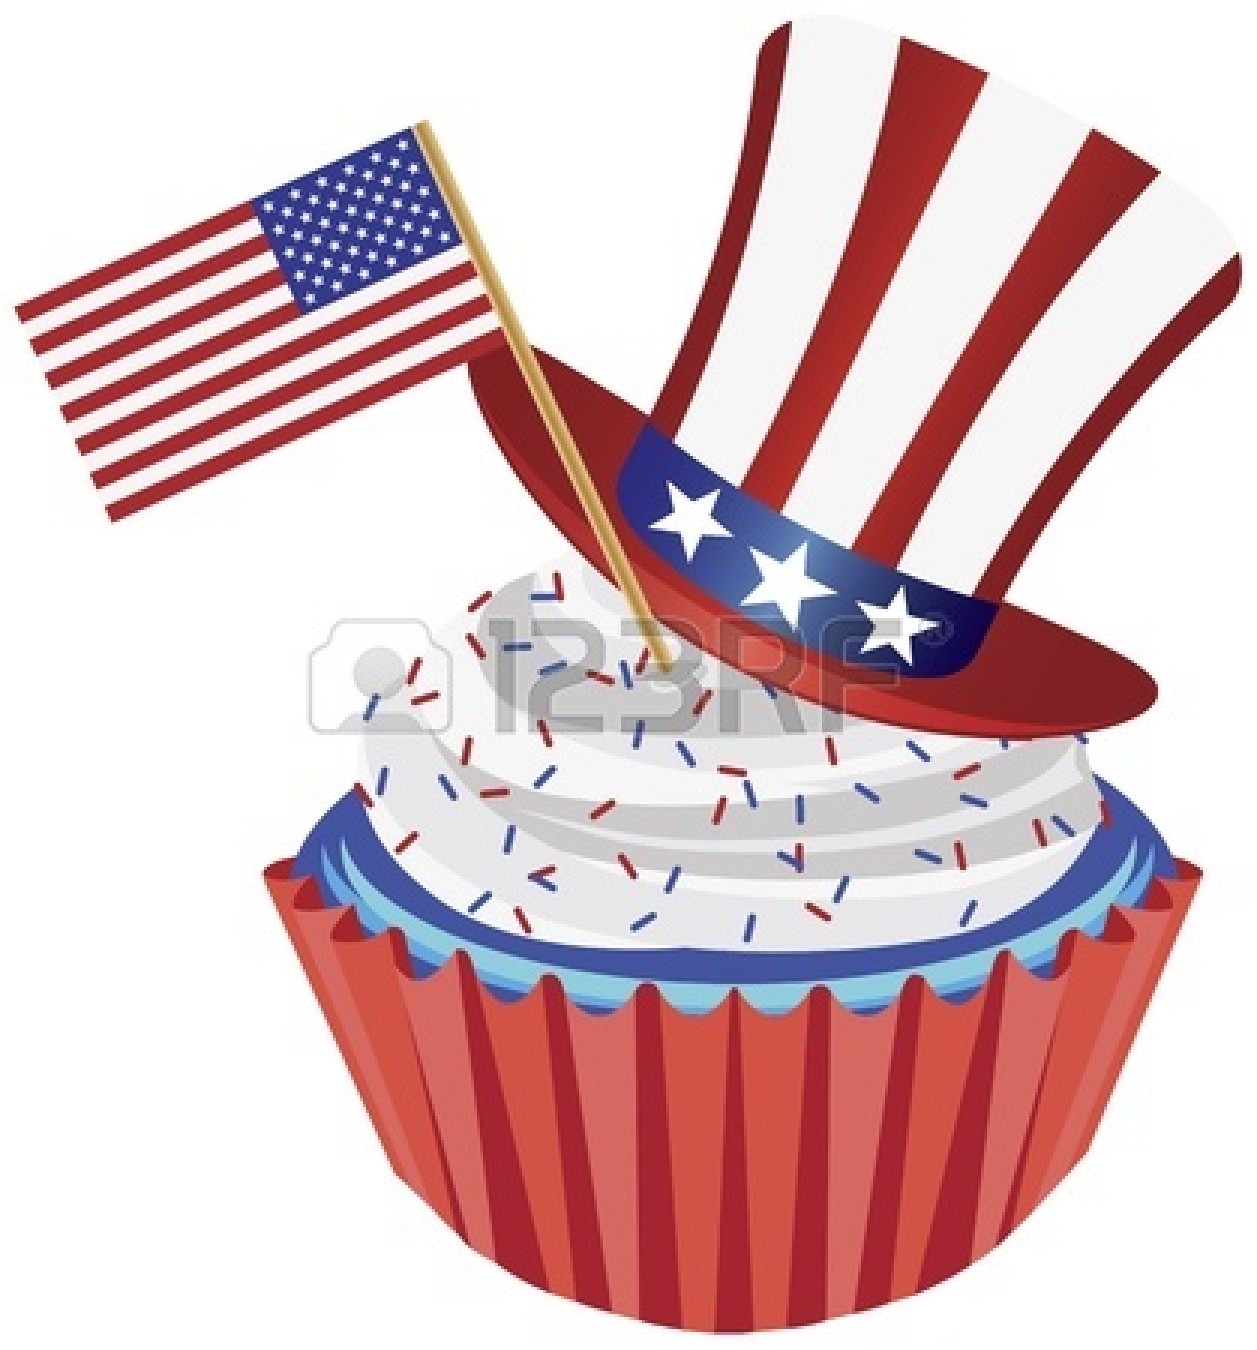 Red White And Blue Fireworks With Flag   Clipart Panda   Free Clipart